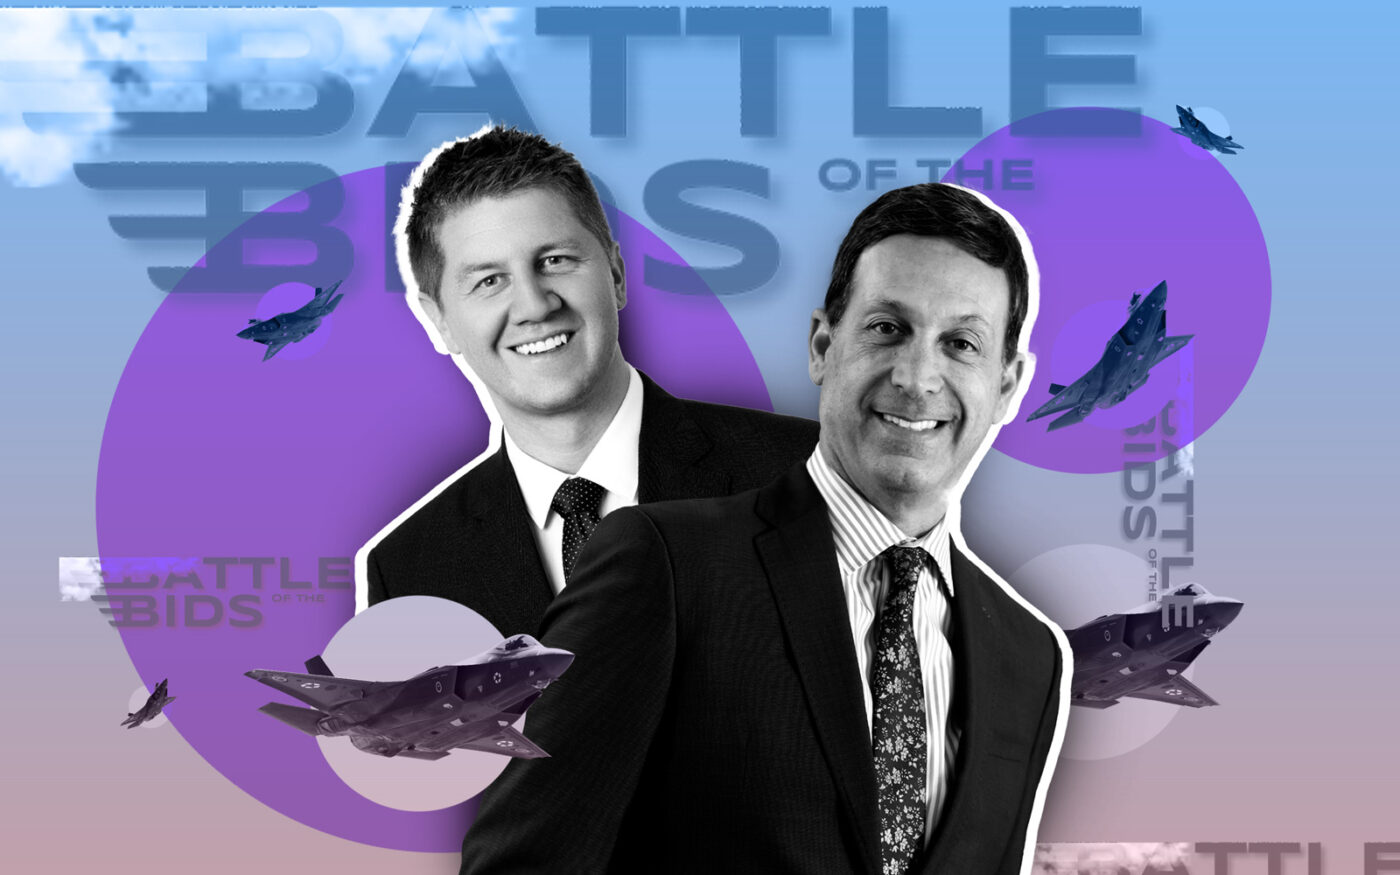 CoStar’s “Battle of the Bids” to give away $3 million in prizes